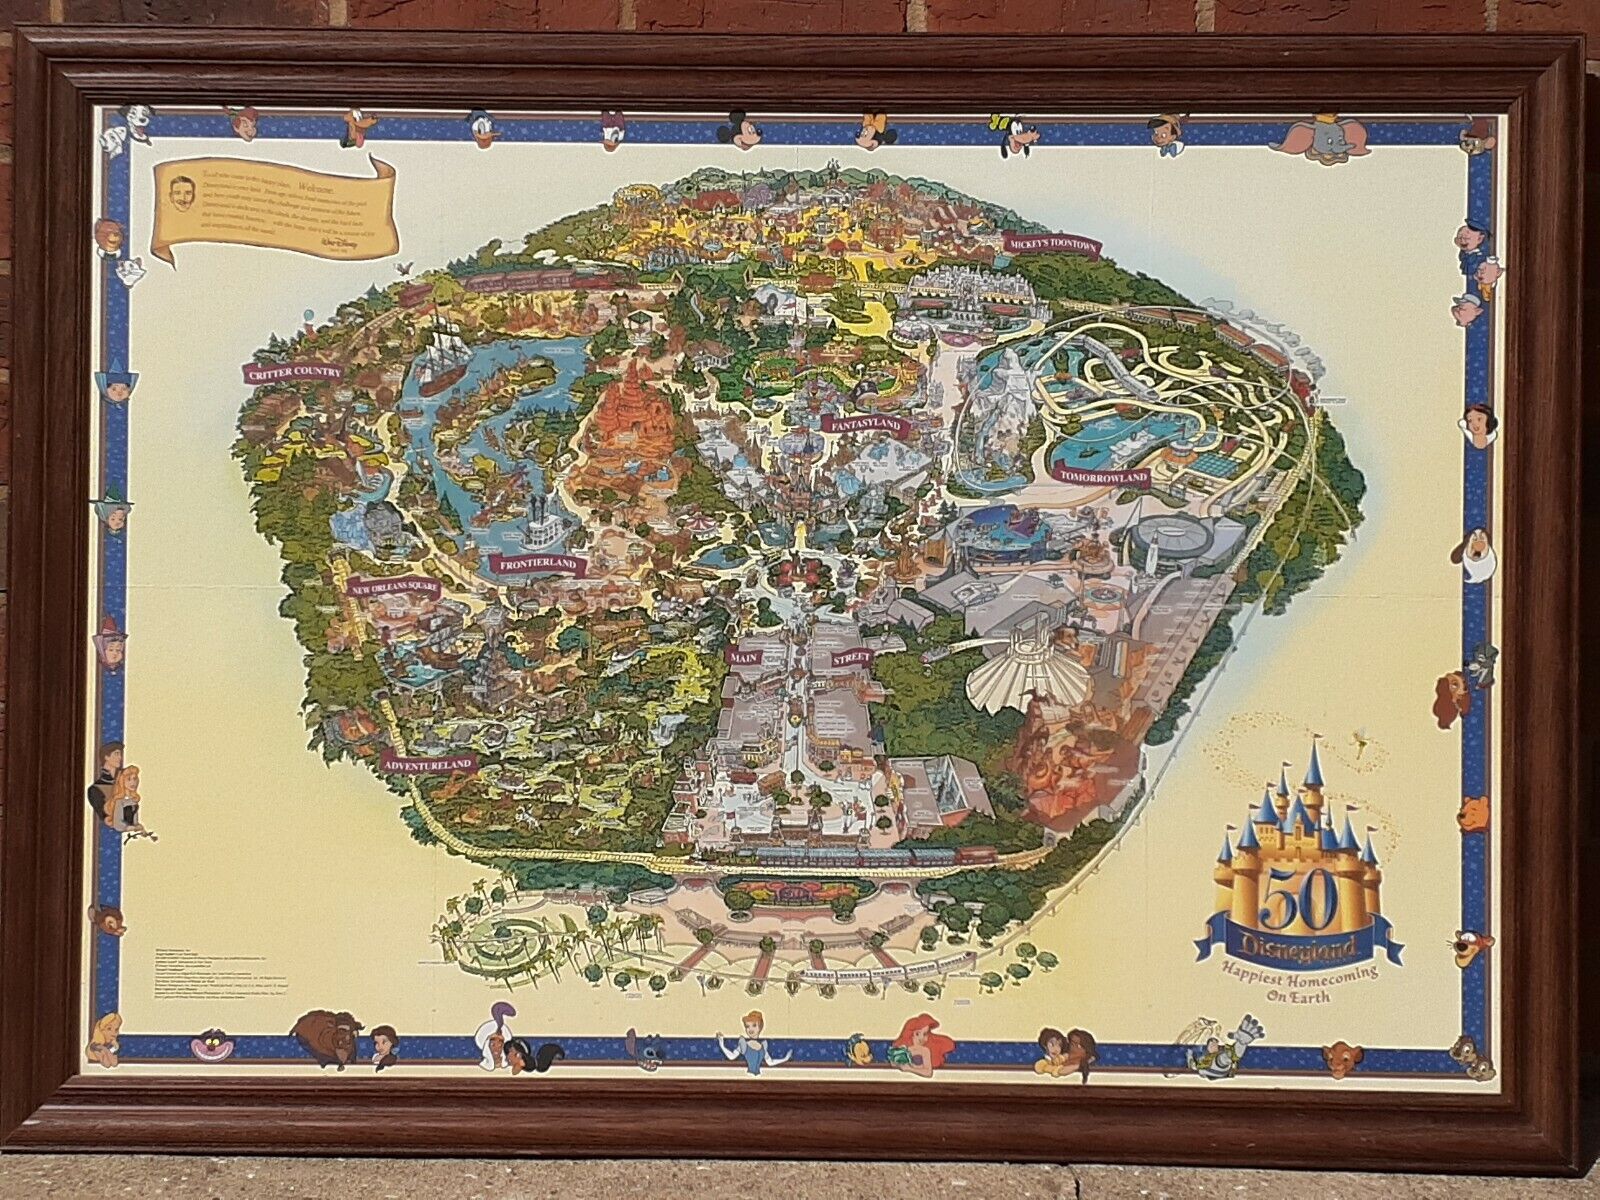 LARGE 2005 DISNEYLAND 50th ANNIVERSARY PARK MAP FRAMED DISNEY COLLECTIBLE 